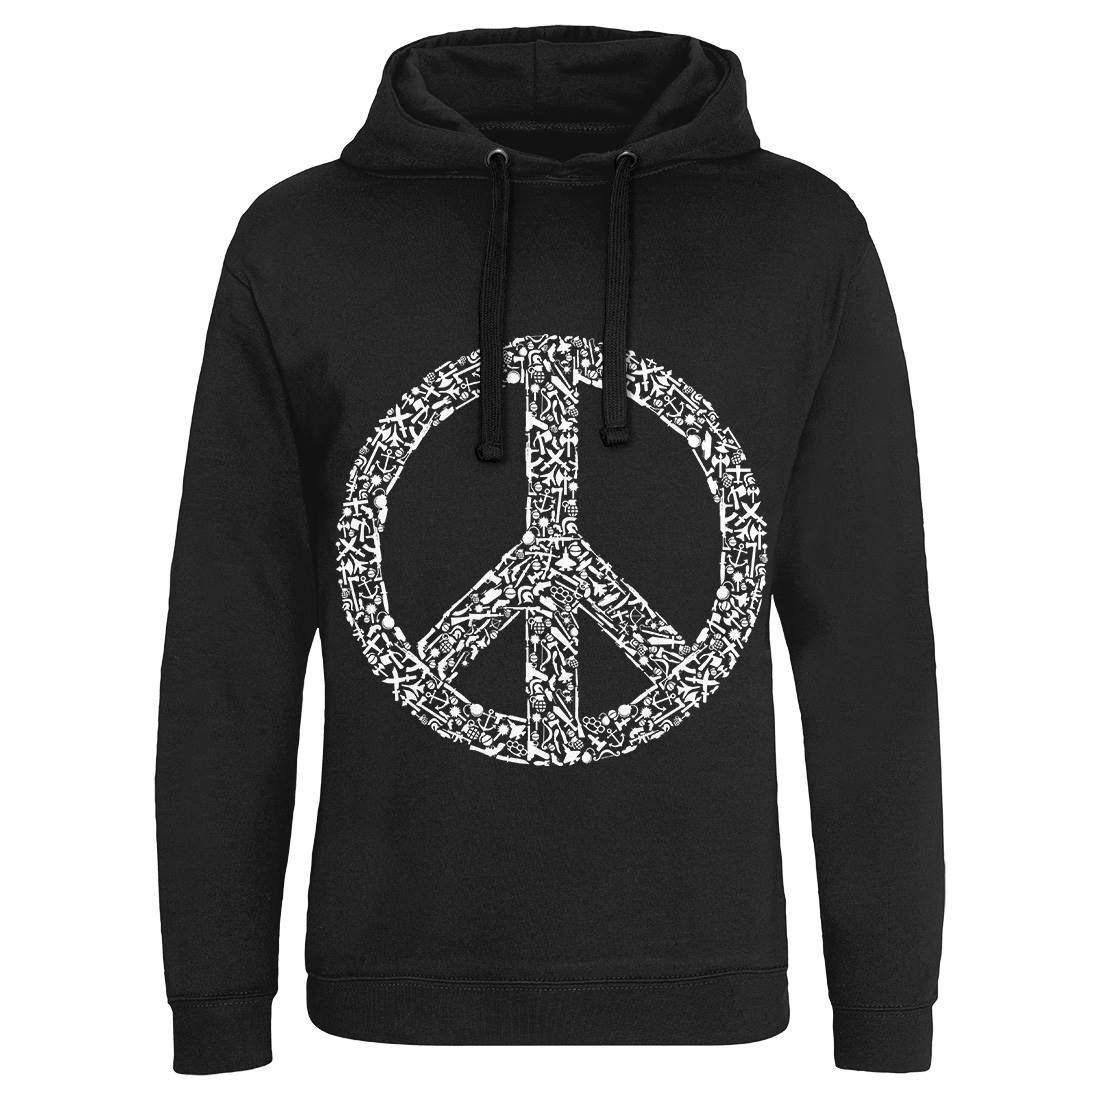 War Mens Hoodie Without Pocket Peace B093